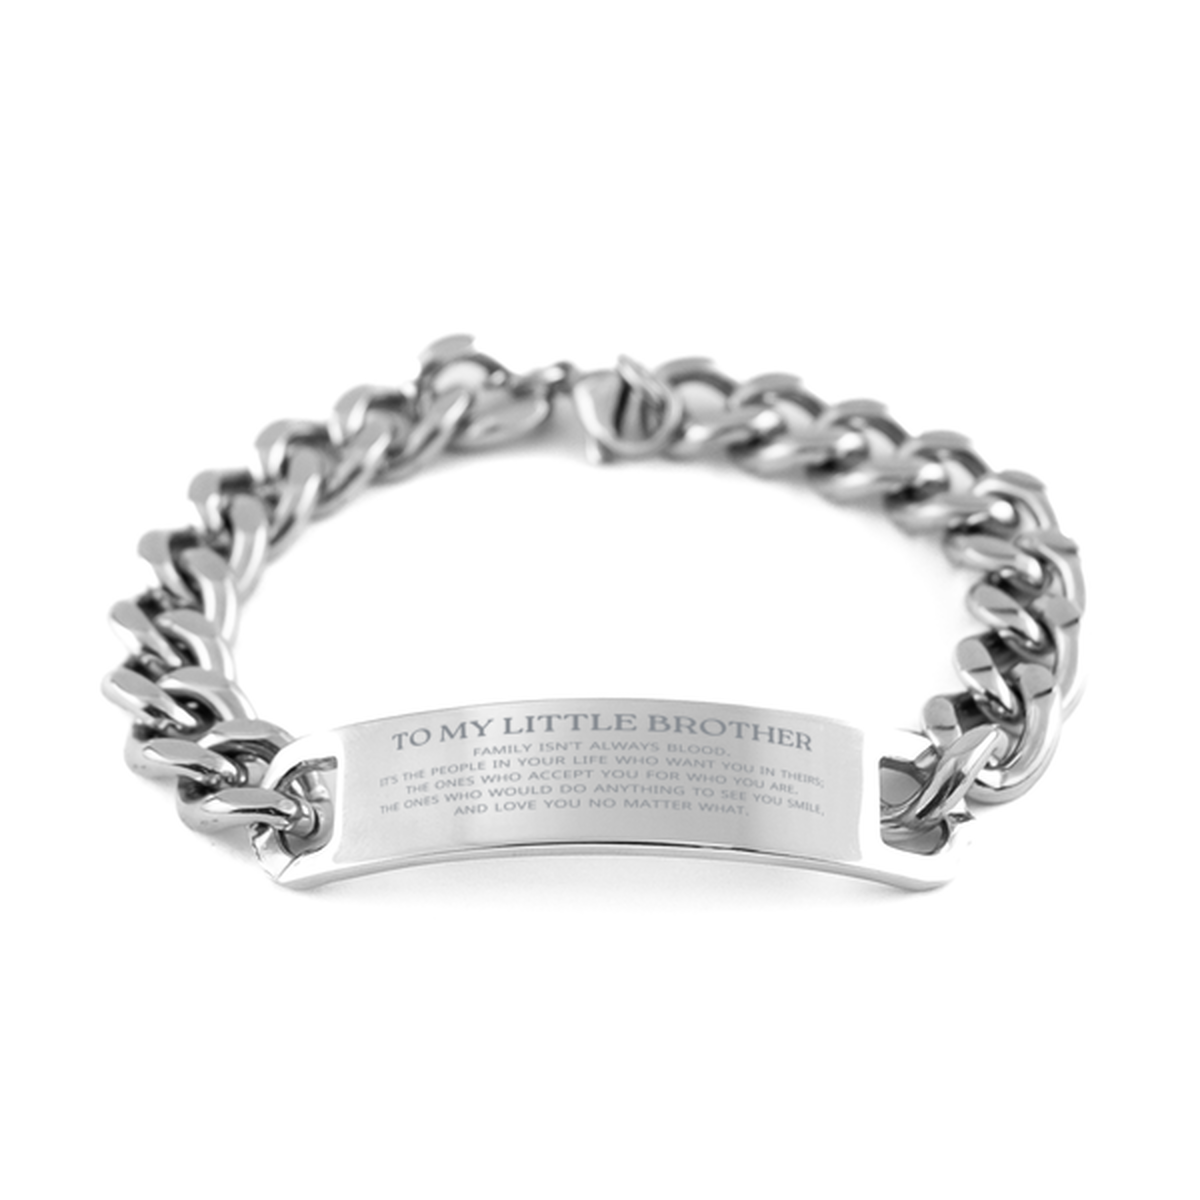 To My Little Brother Gifts, Family isn't always blood, Little Brother Cuban Chain Stainless Steel Bracelet, Birthday Christmas Unique Present For Little Brother